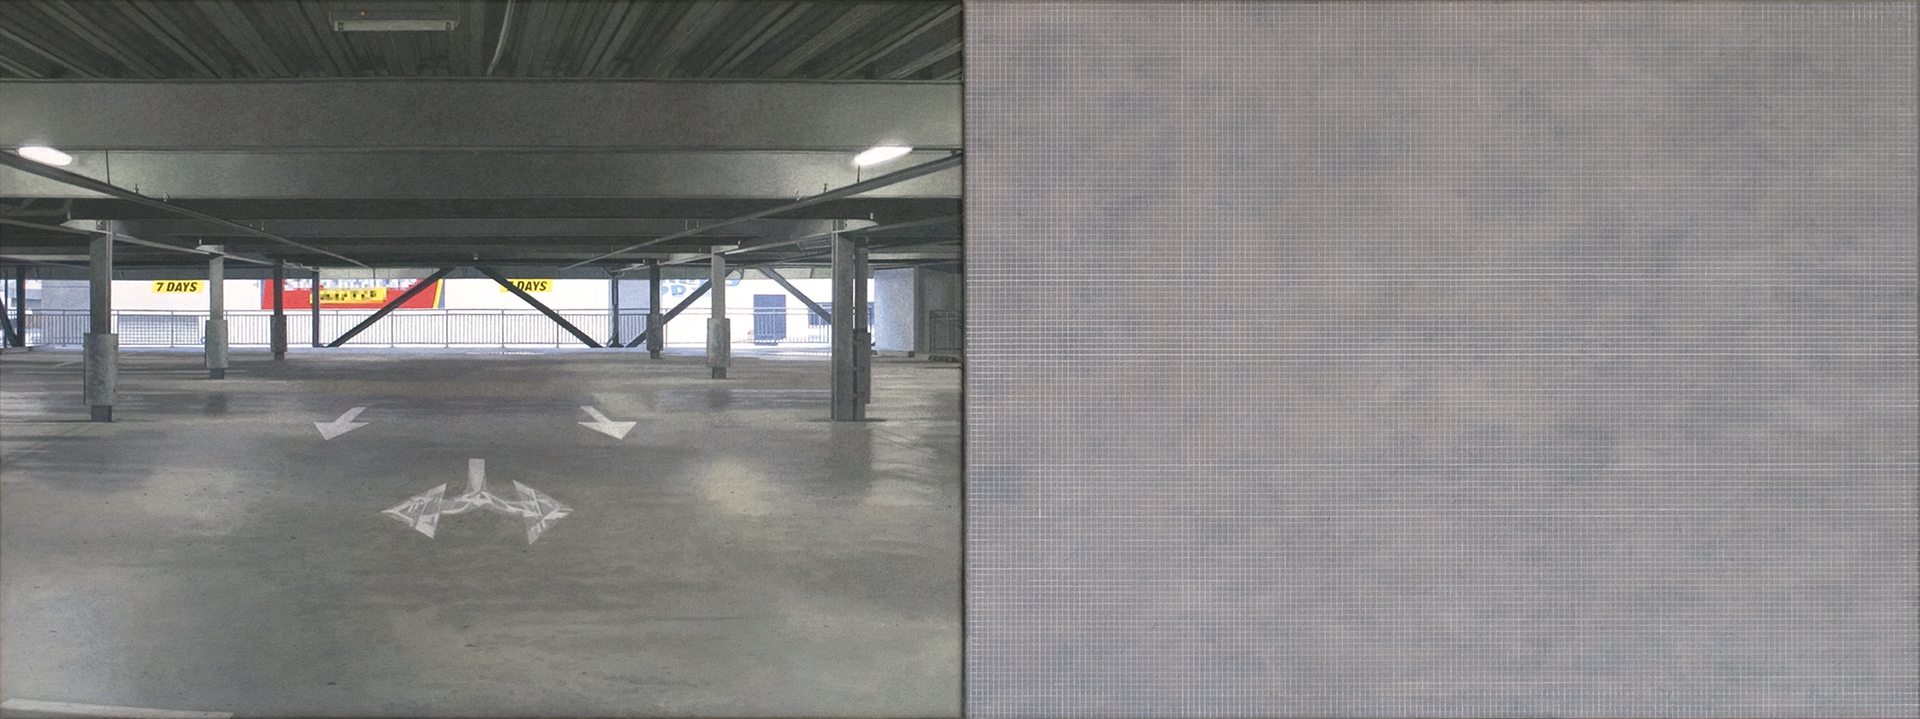 Concrete with Grid #2, 2016, acrylic on board (two panels), 695 x 1040mm